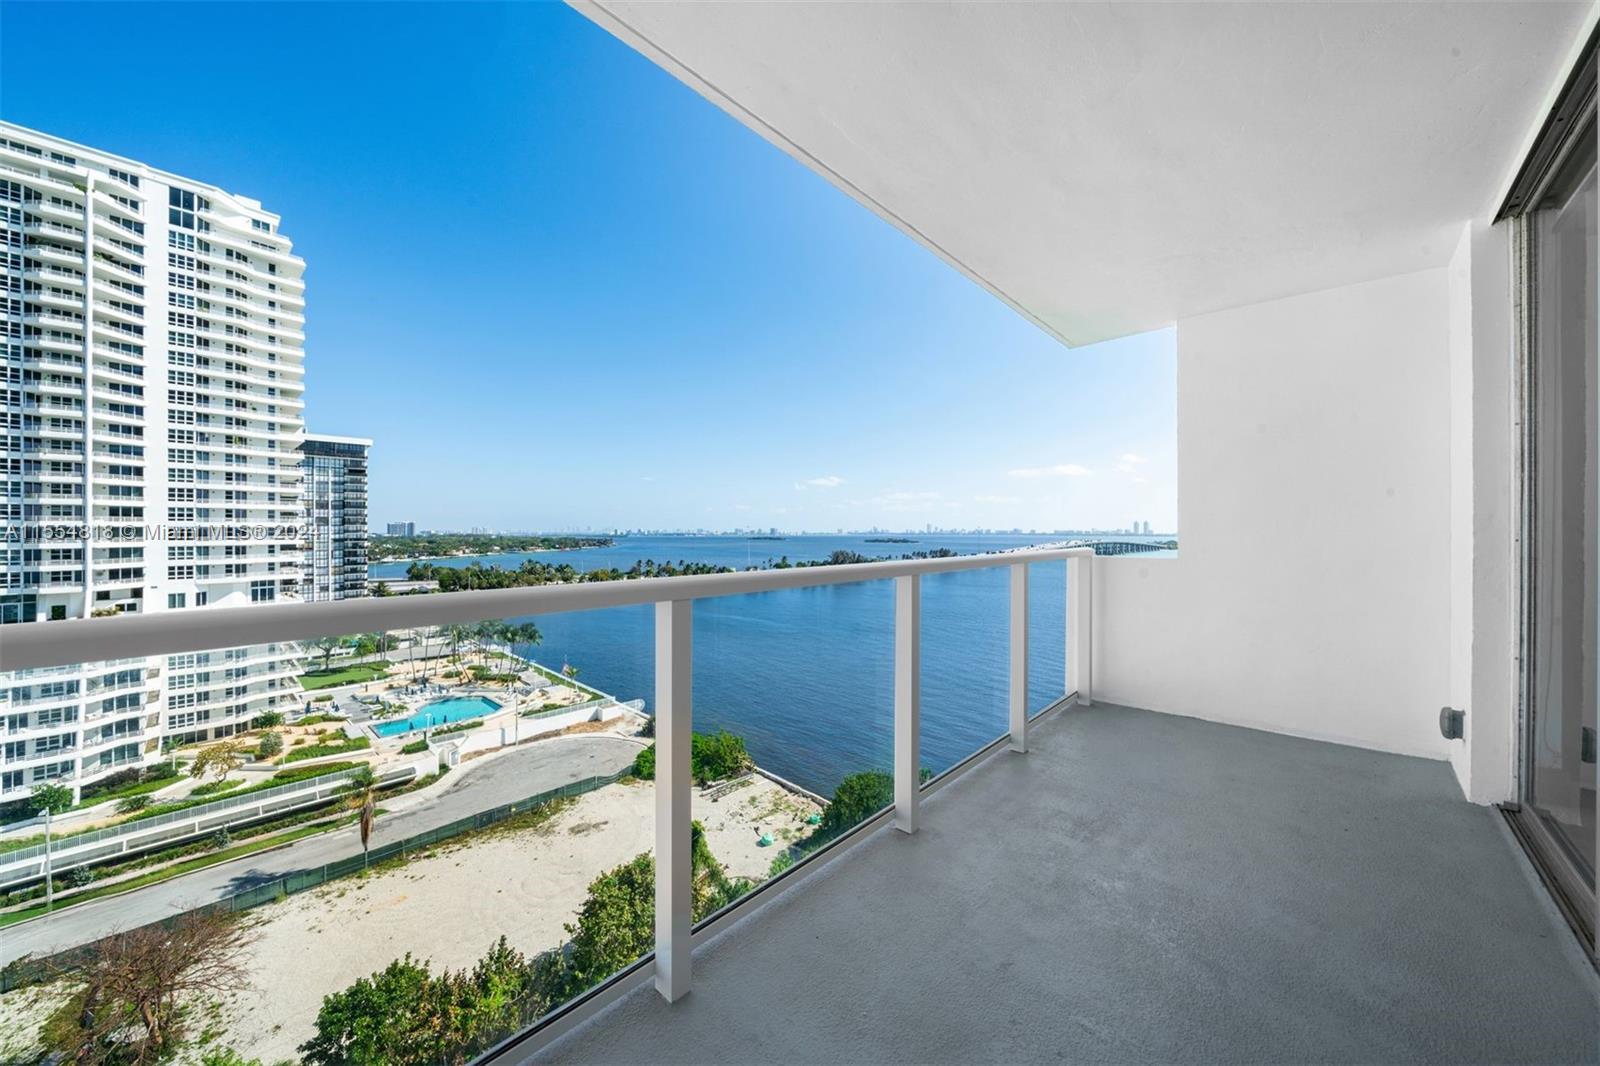 BEAUTIFULLY REMODELED WATERFRONT STUDIO WITH BREATHTAKING VIEWS OF BISCAYNE BAY IN THE HEART OF EDGE